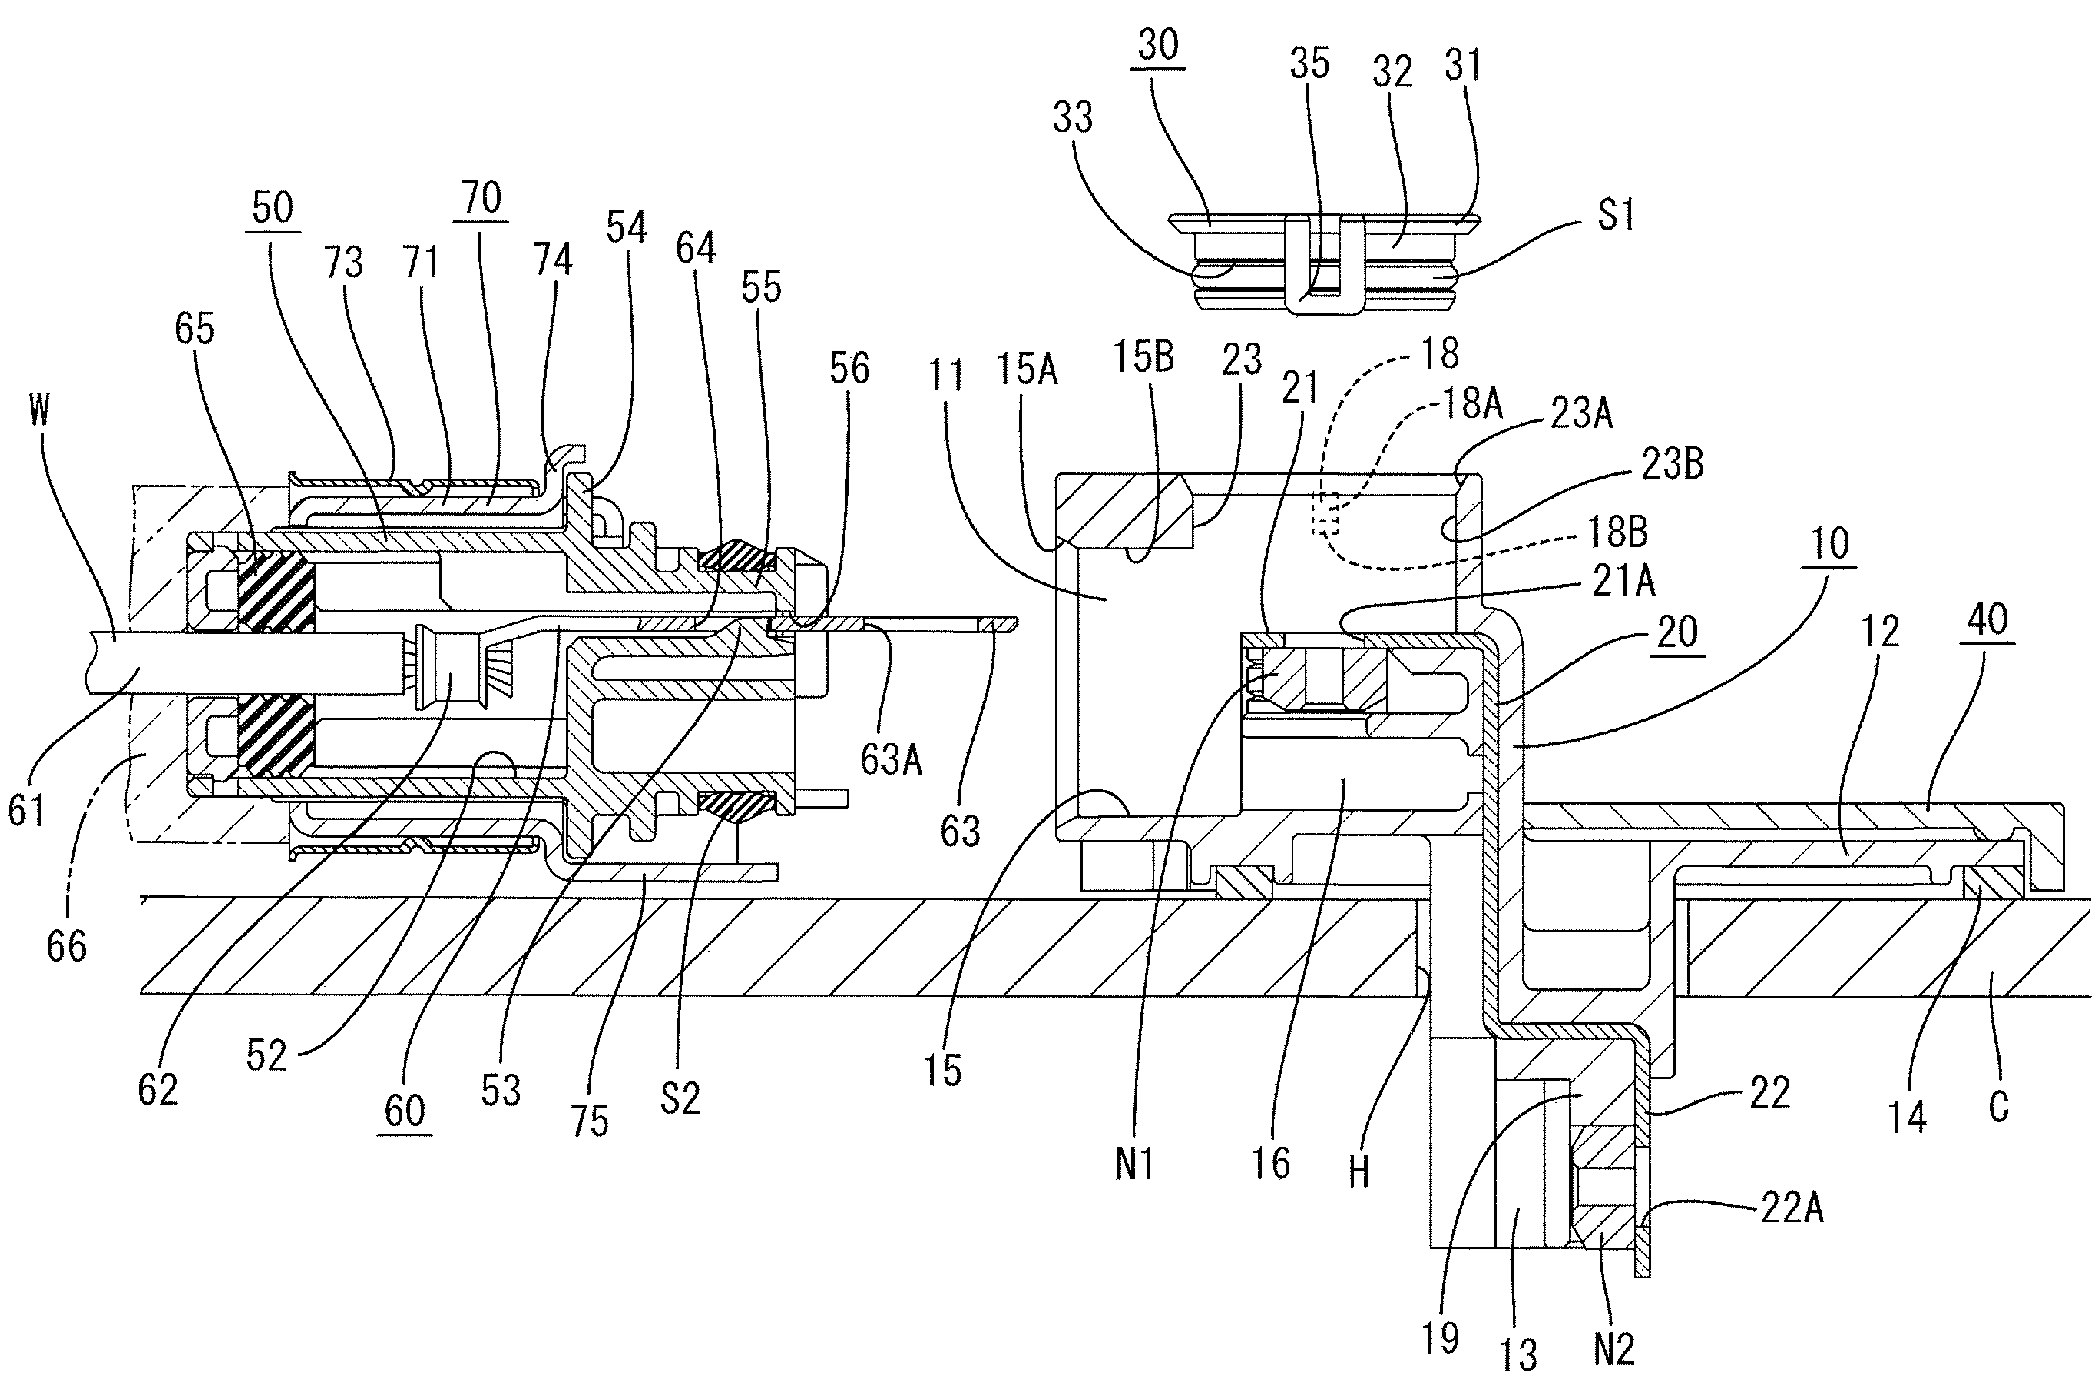 Device connector with mating terminals bolted together